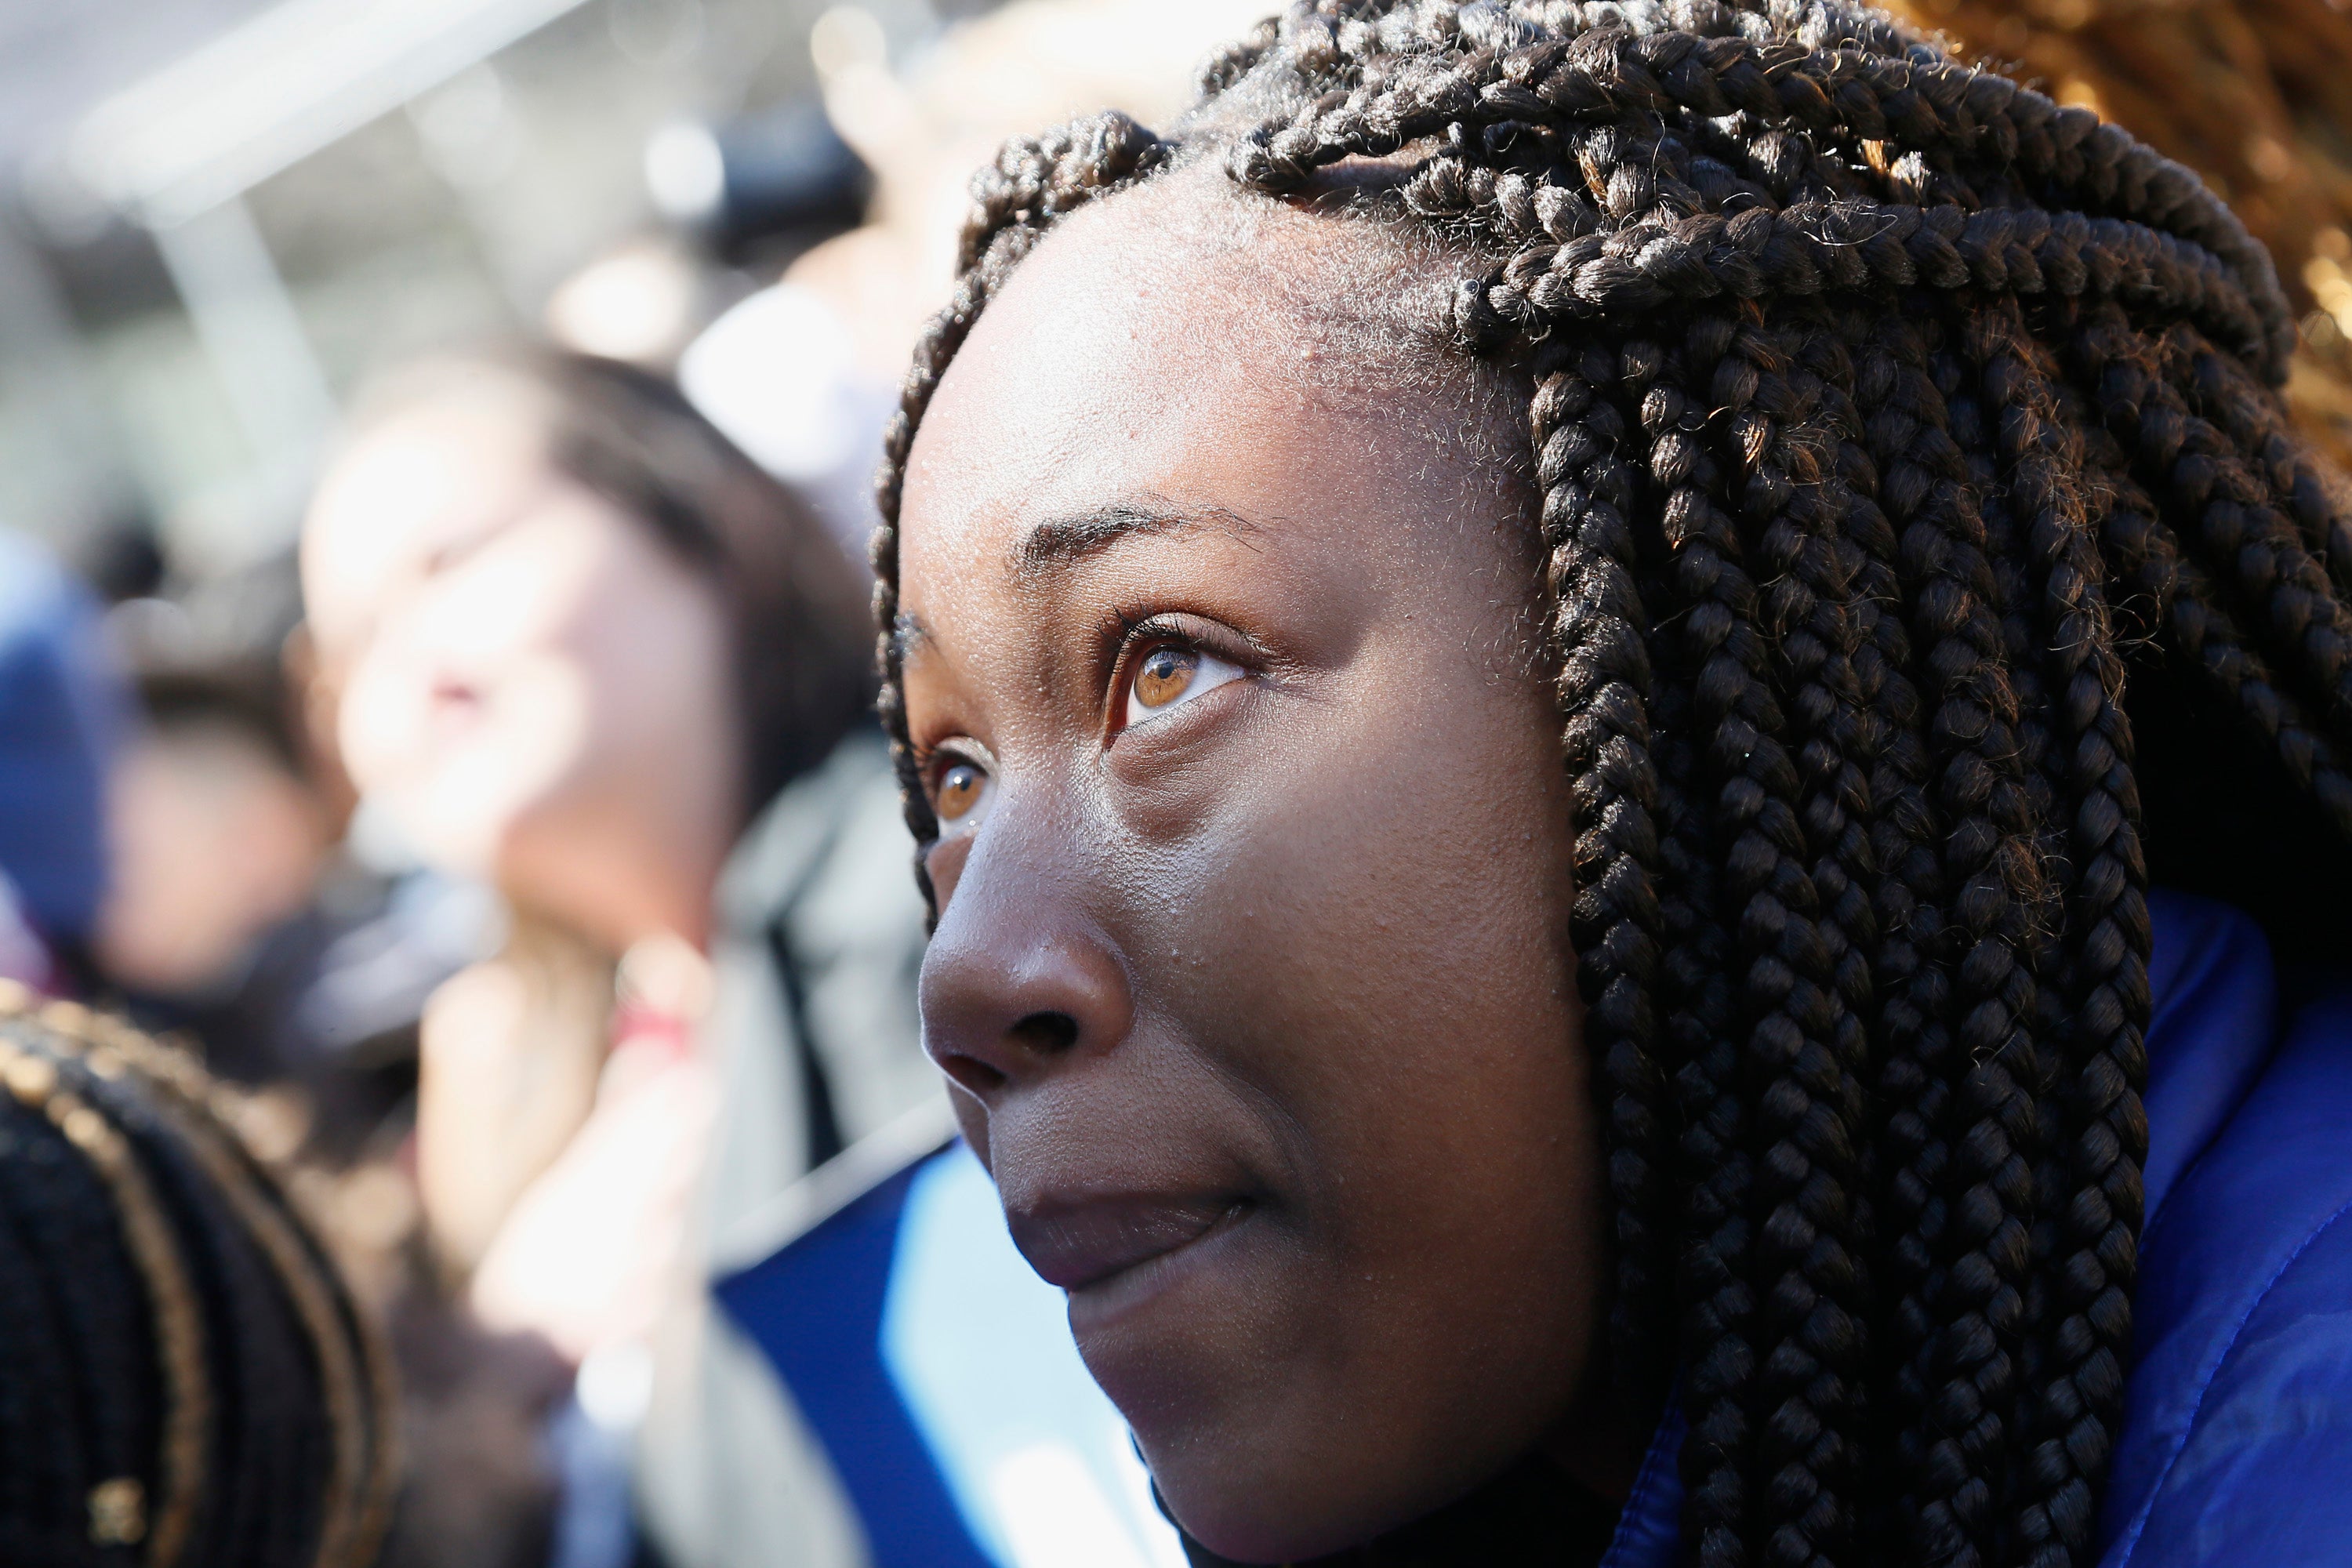 Black Youth Made Their Presence Felt At The 'March For Our Lives' Rally
